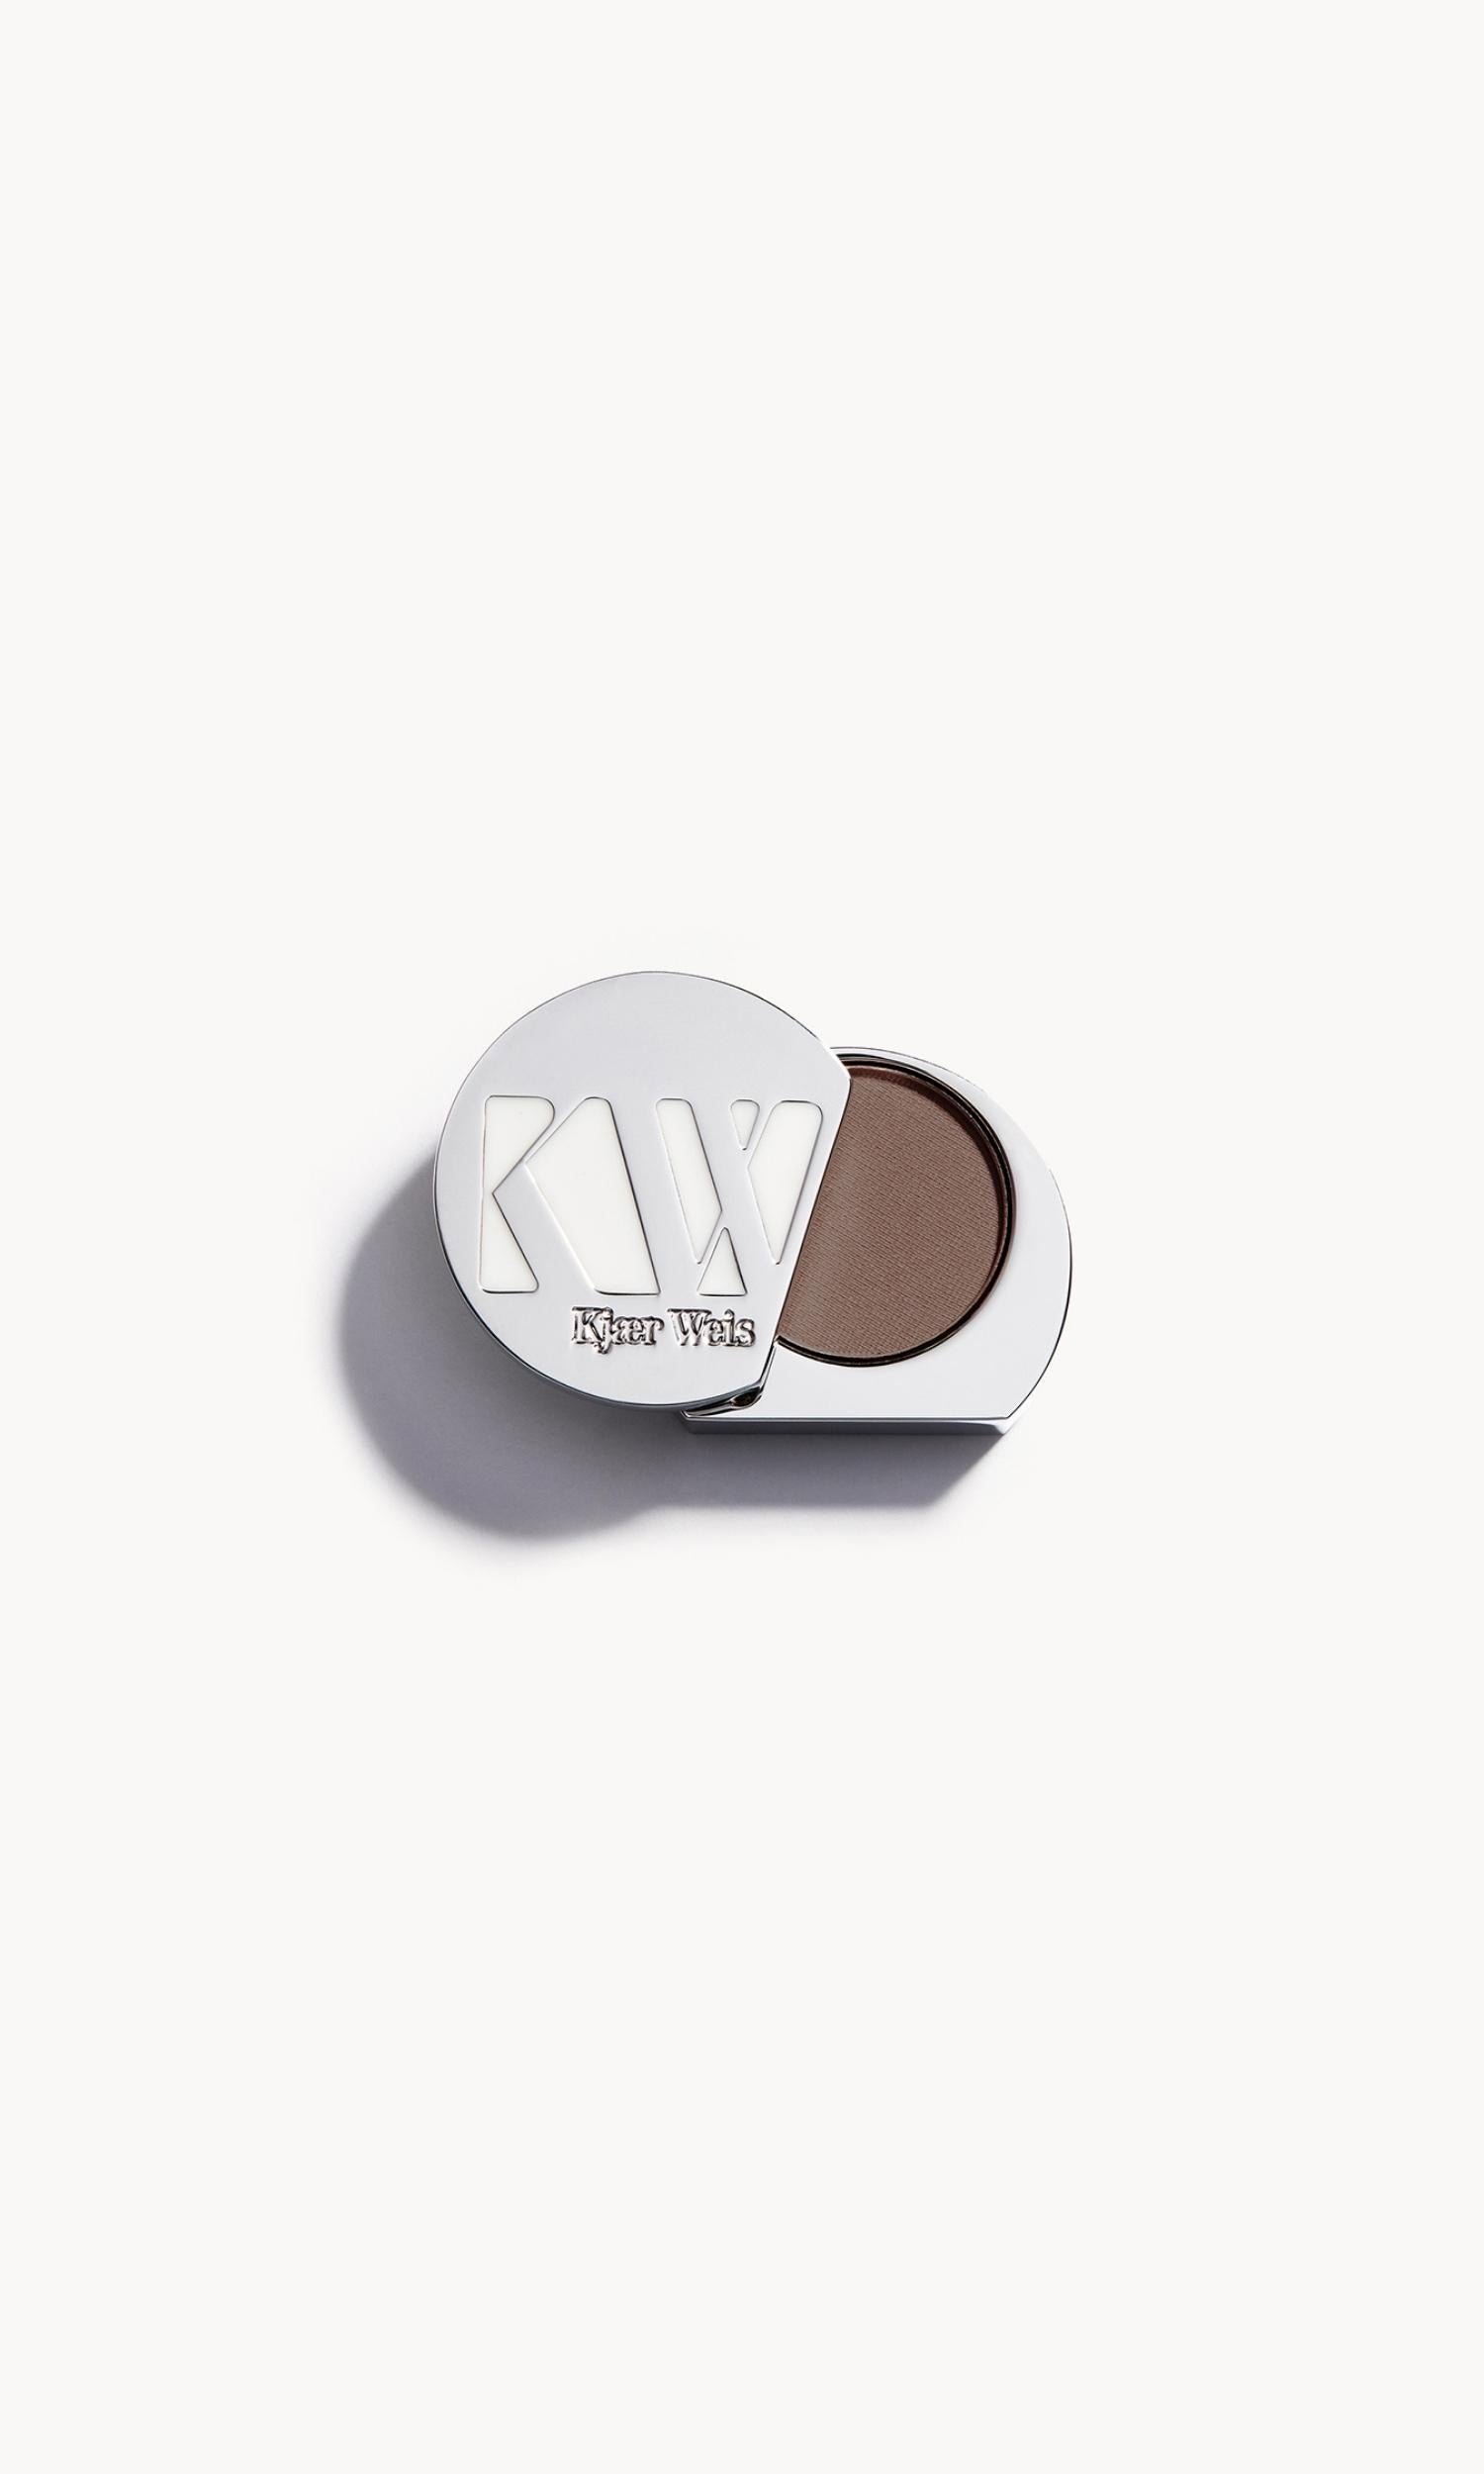 solid metal kw palette with lid open to show greyish brown eye shadow inside